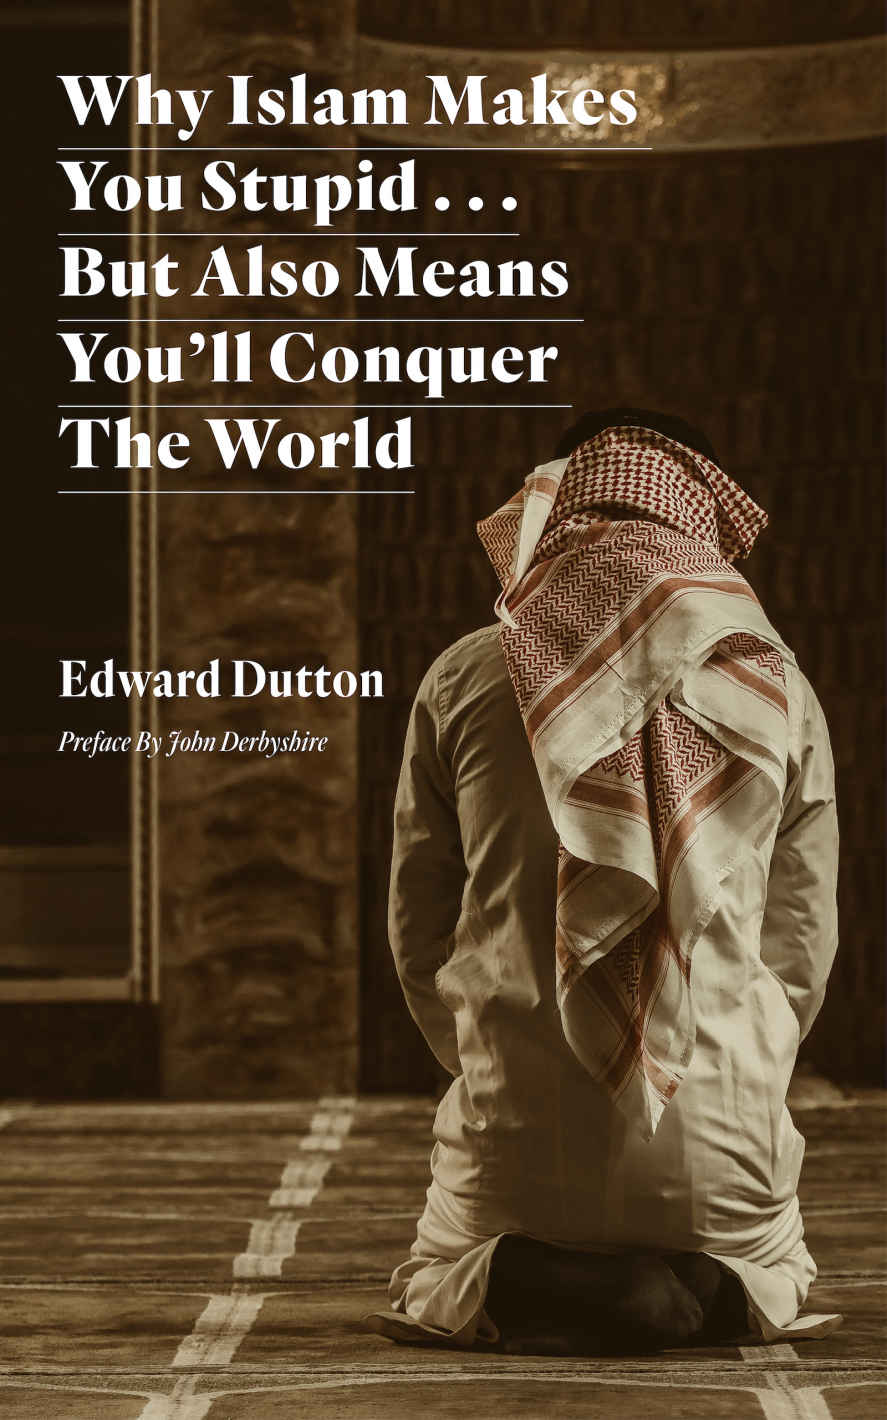 Why Islam Makes You Stupid... But Also Means You'll Conquer The World